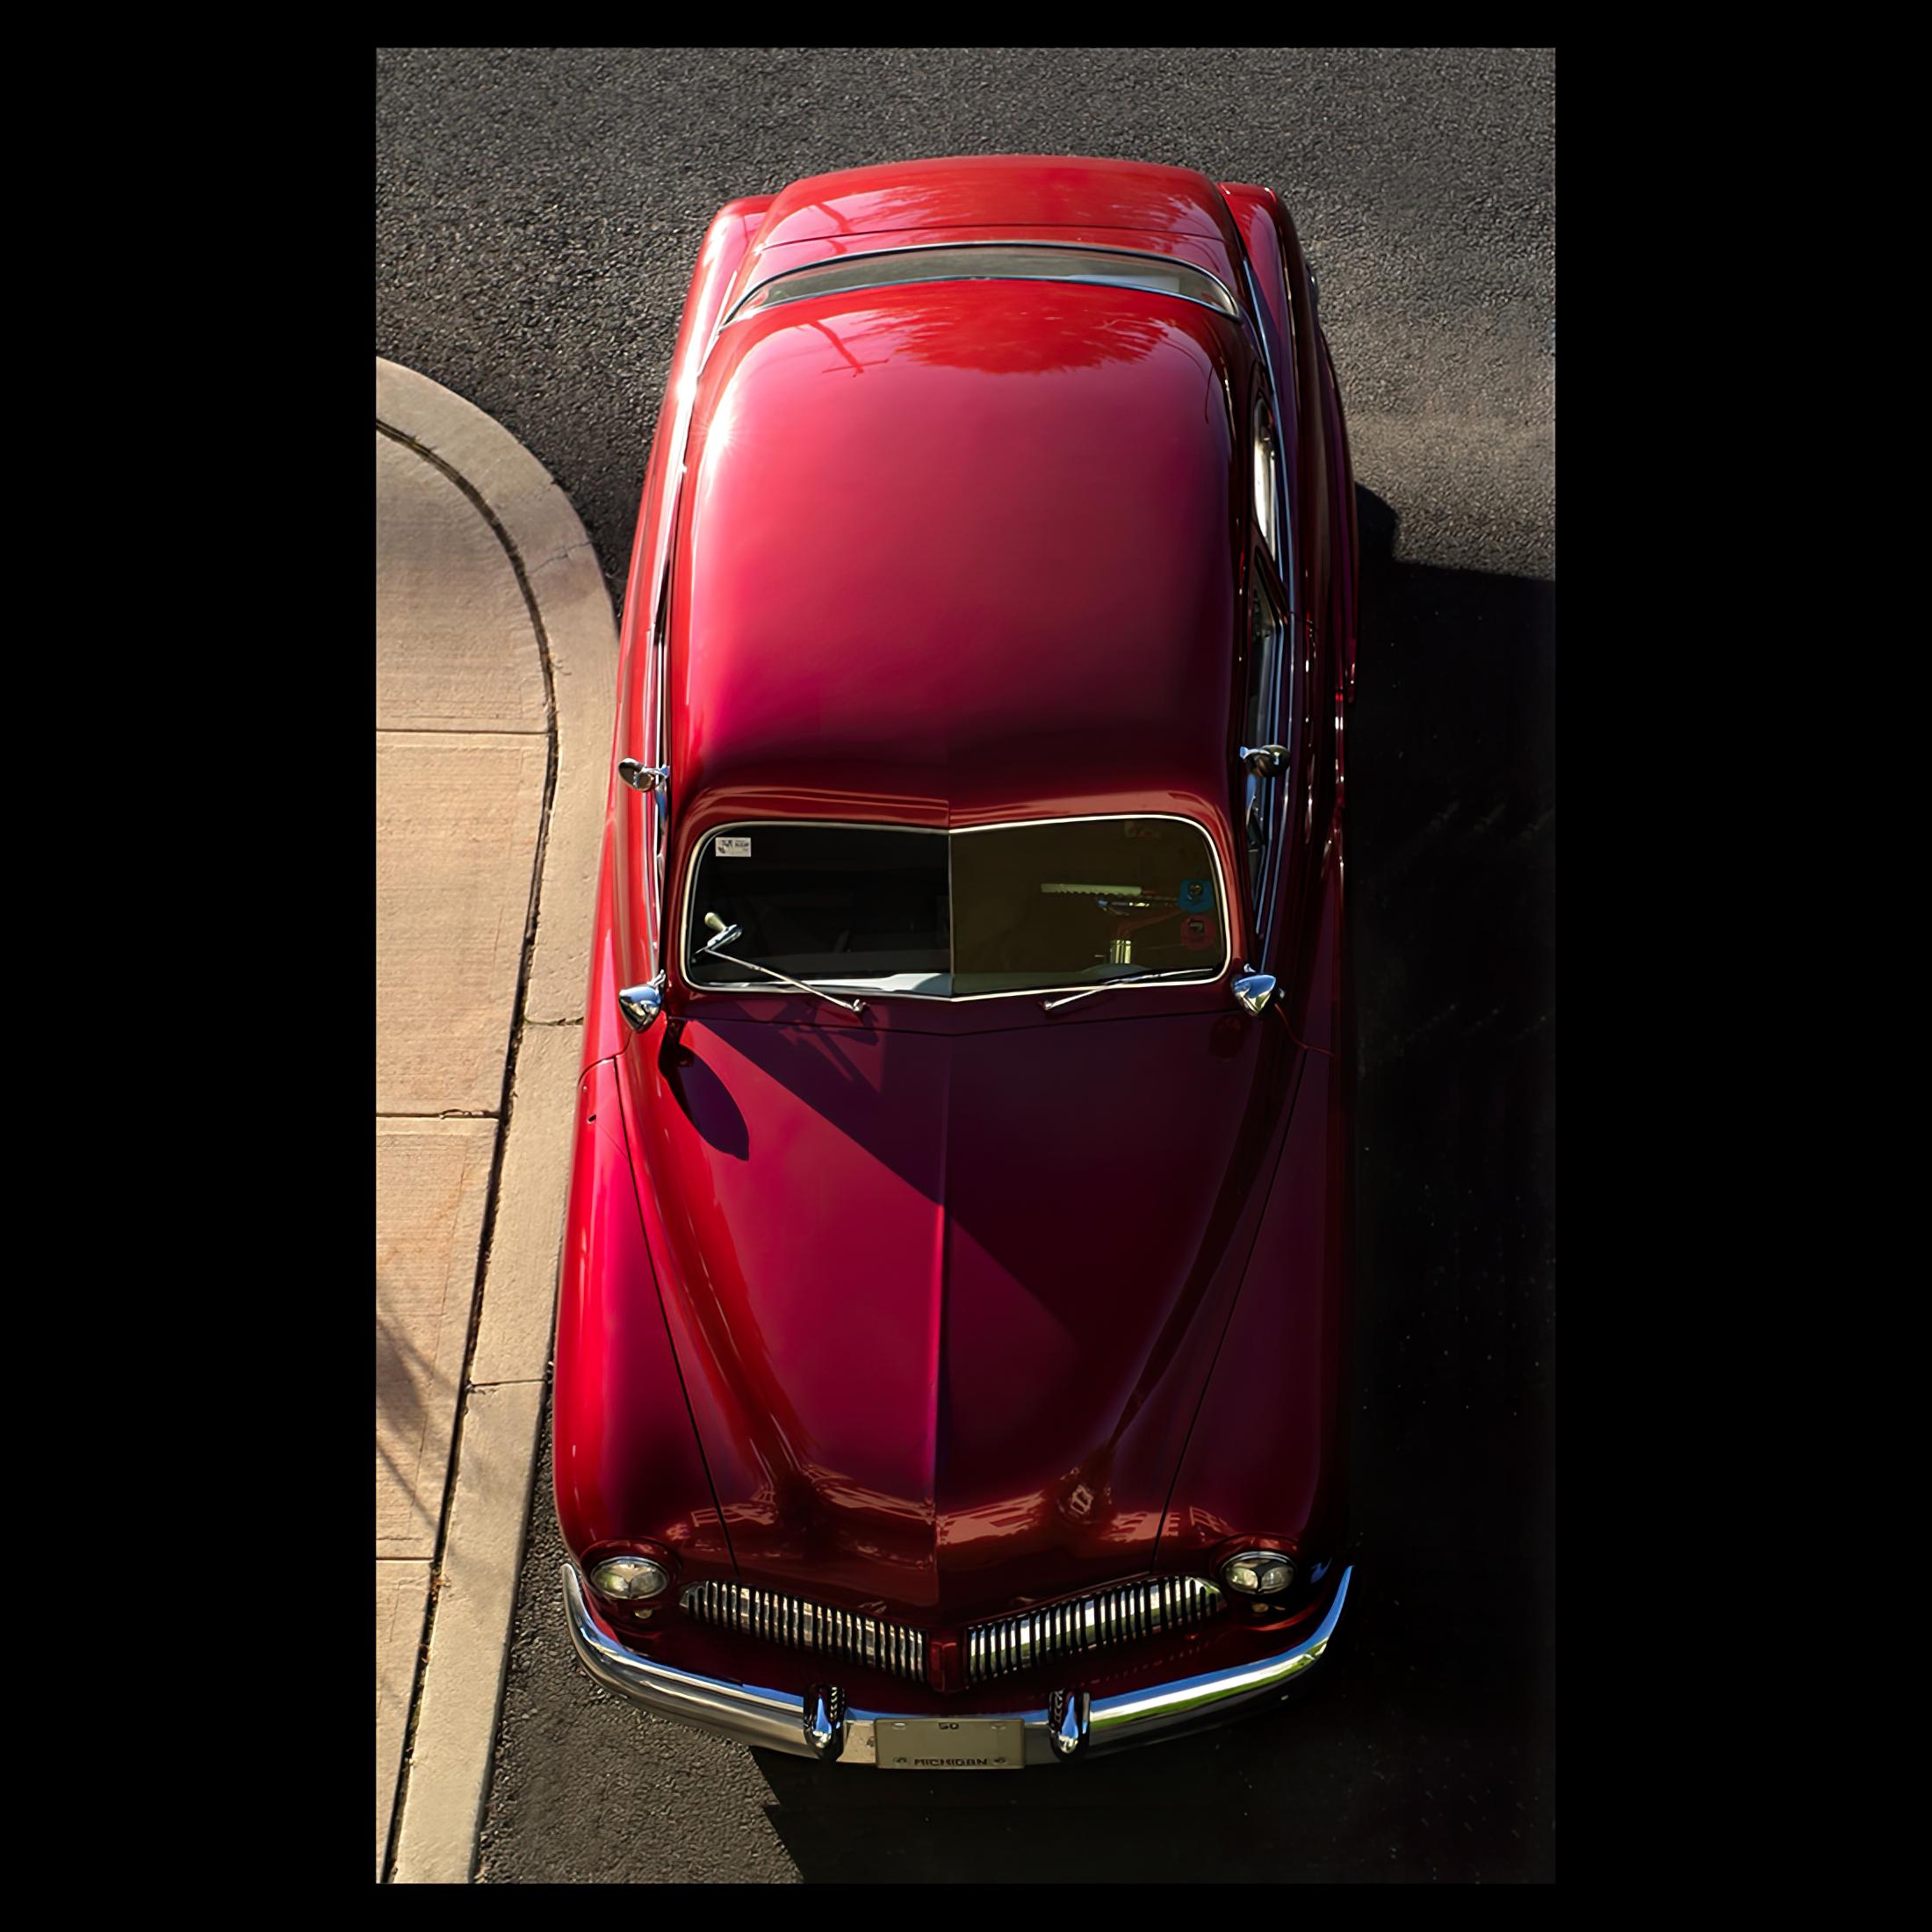 Geoff Halpin Color Photograph - Red Mercury- Signed limited edition car print, USA, Contemporary, Vintage